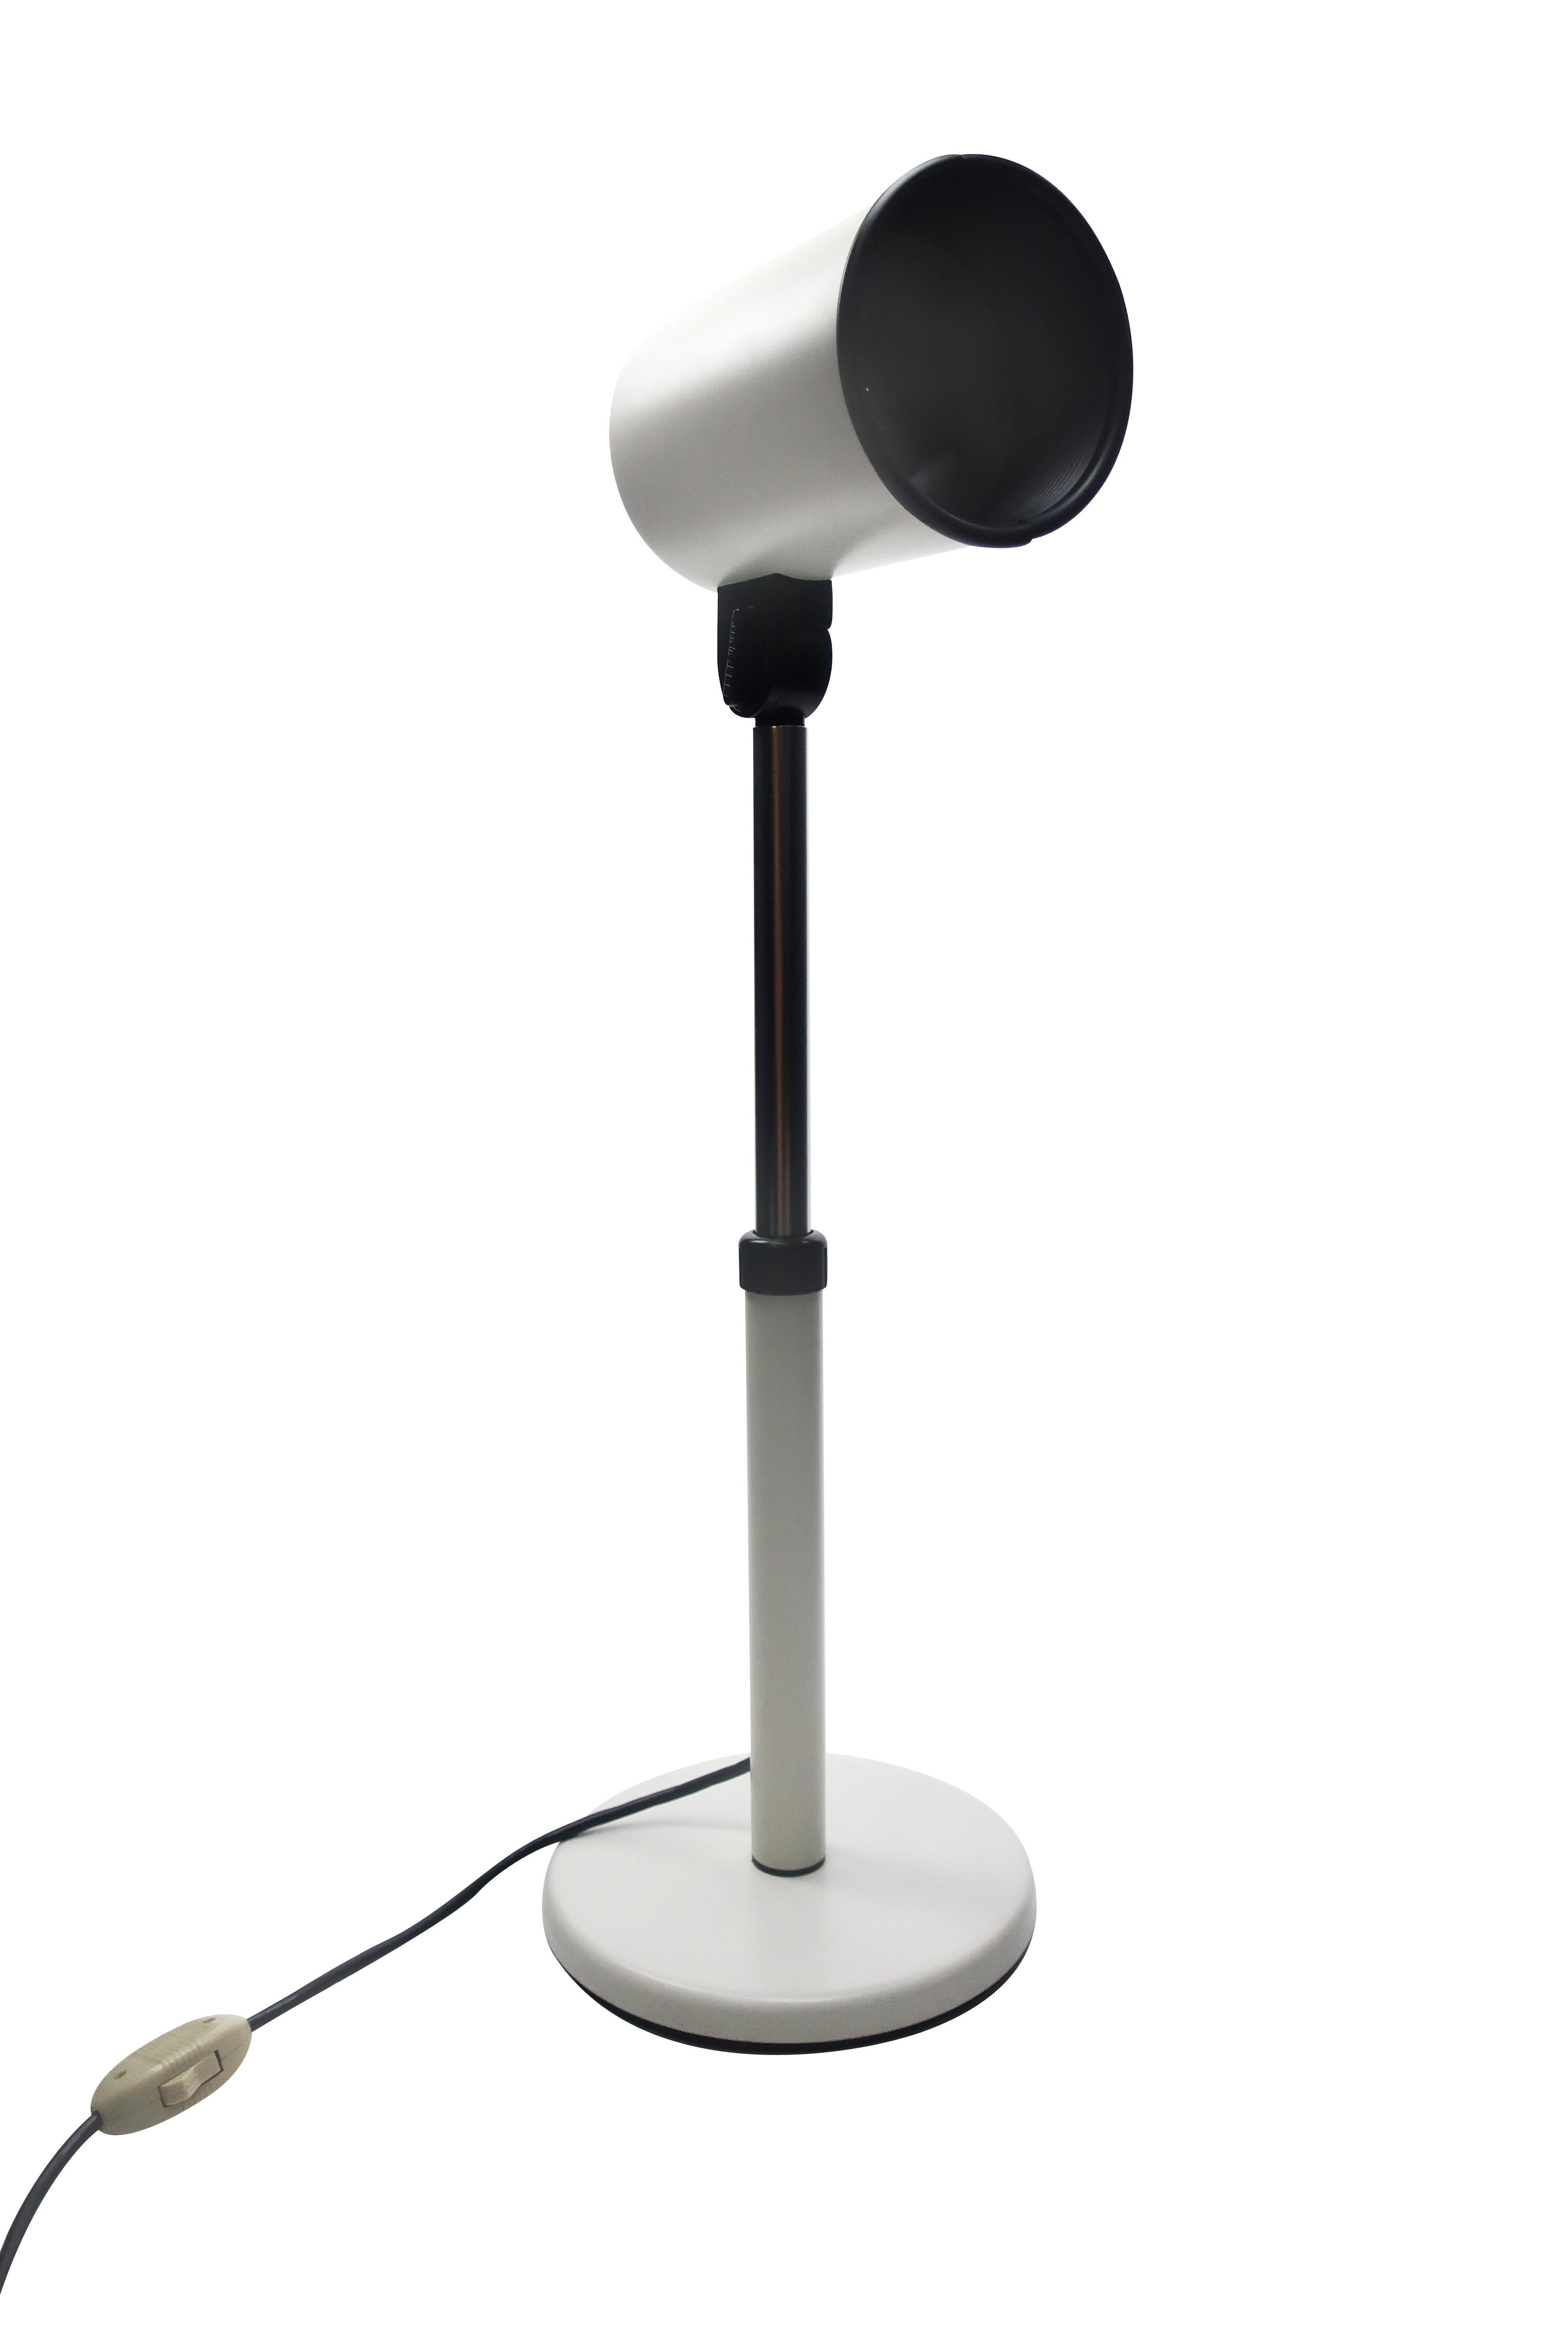 A vintage 1970s white Studio FPM table lamp that can be used as a desk lamp or accent lighting perfect for home or the office. White round metal base, white and chrome stem with black adjusters, and white metal shade with black accent. In excellent